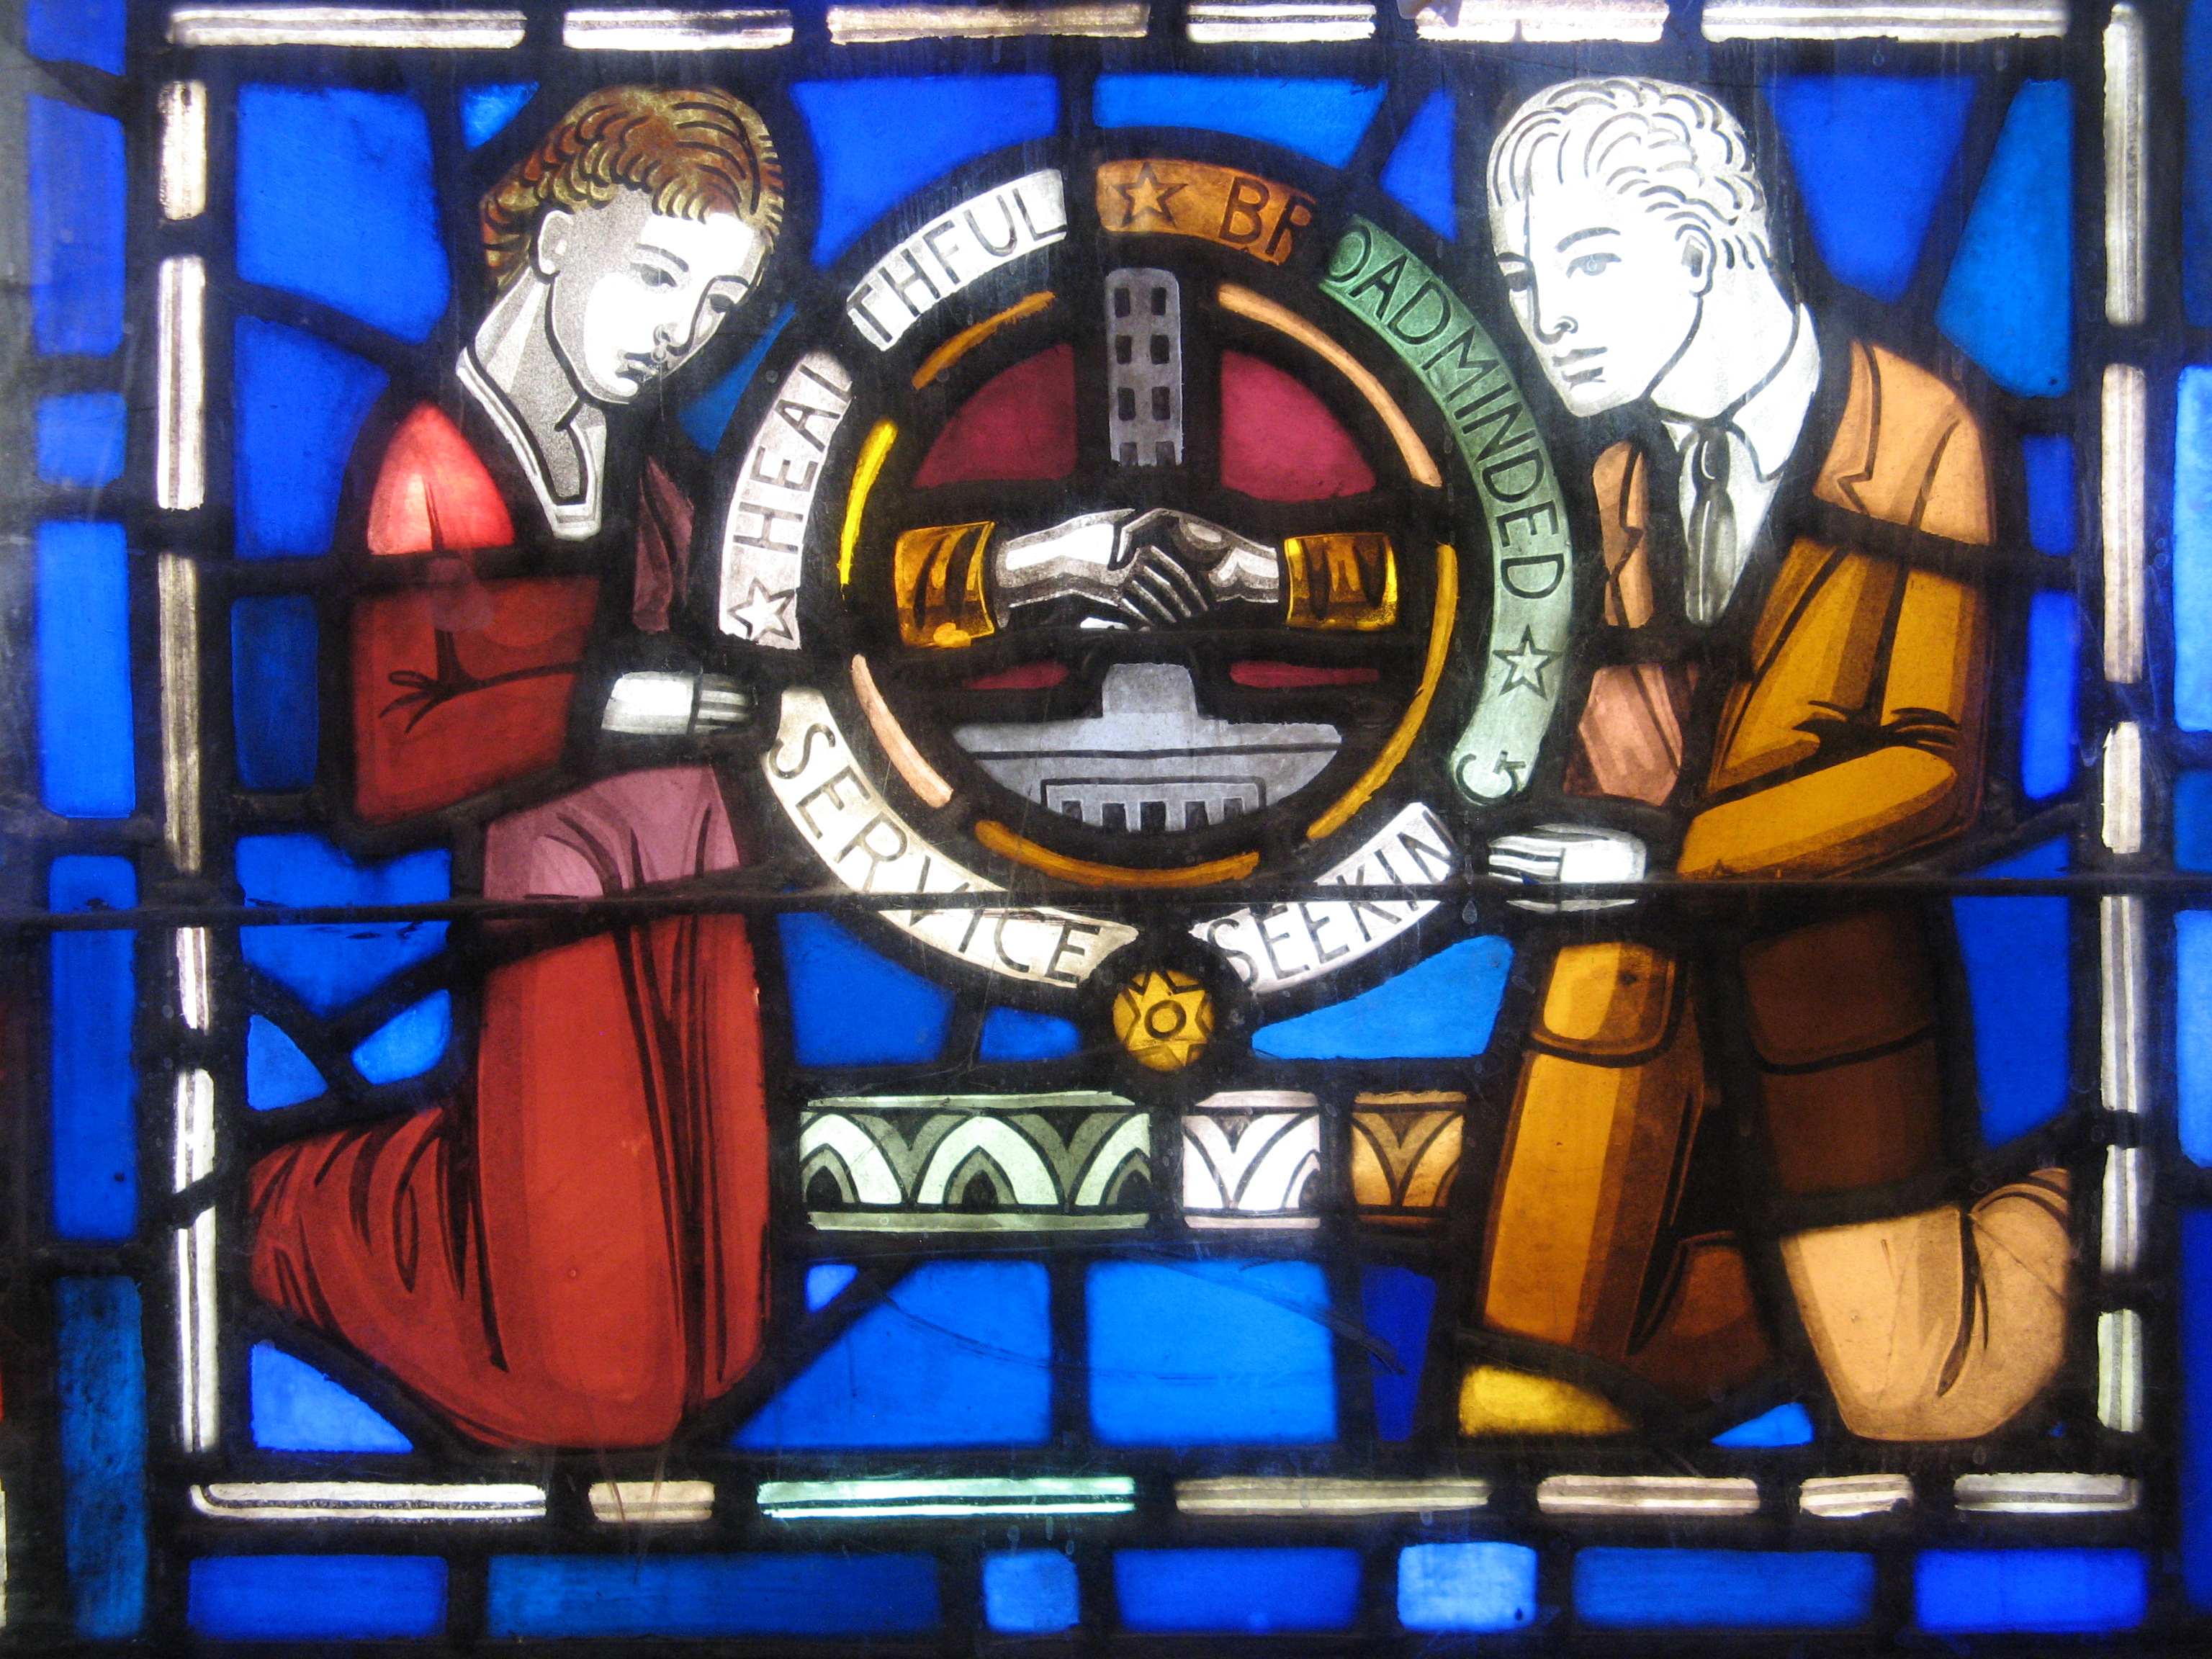 Above is a section of the Art Deco style stained glass window by Robert and Gertrude Metcalf, showing our Fairview High School motto and the tower from the original Fairview located at Catalpa and Fairview. 